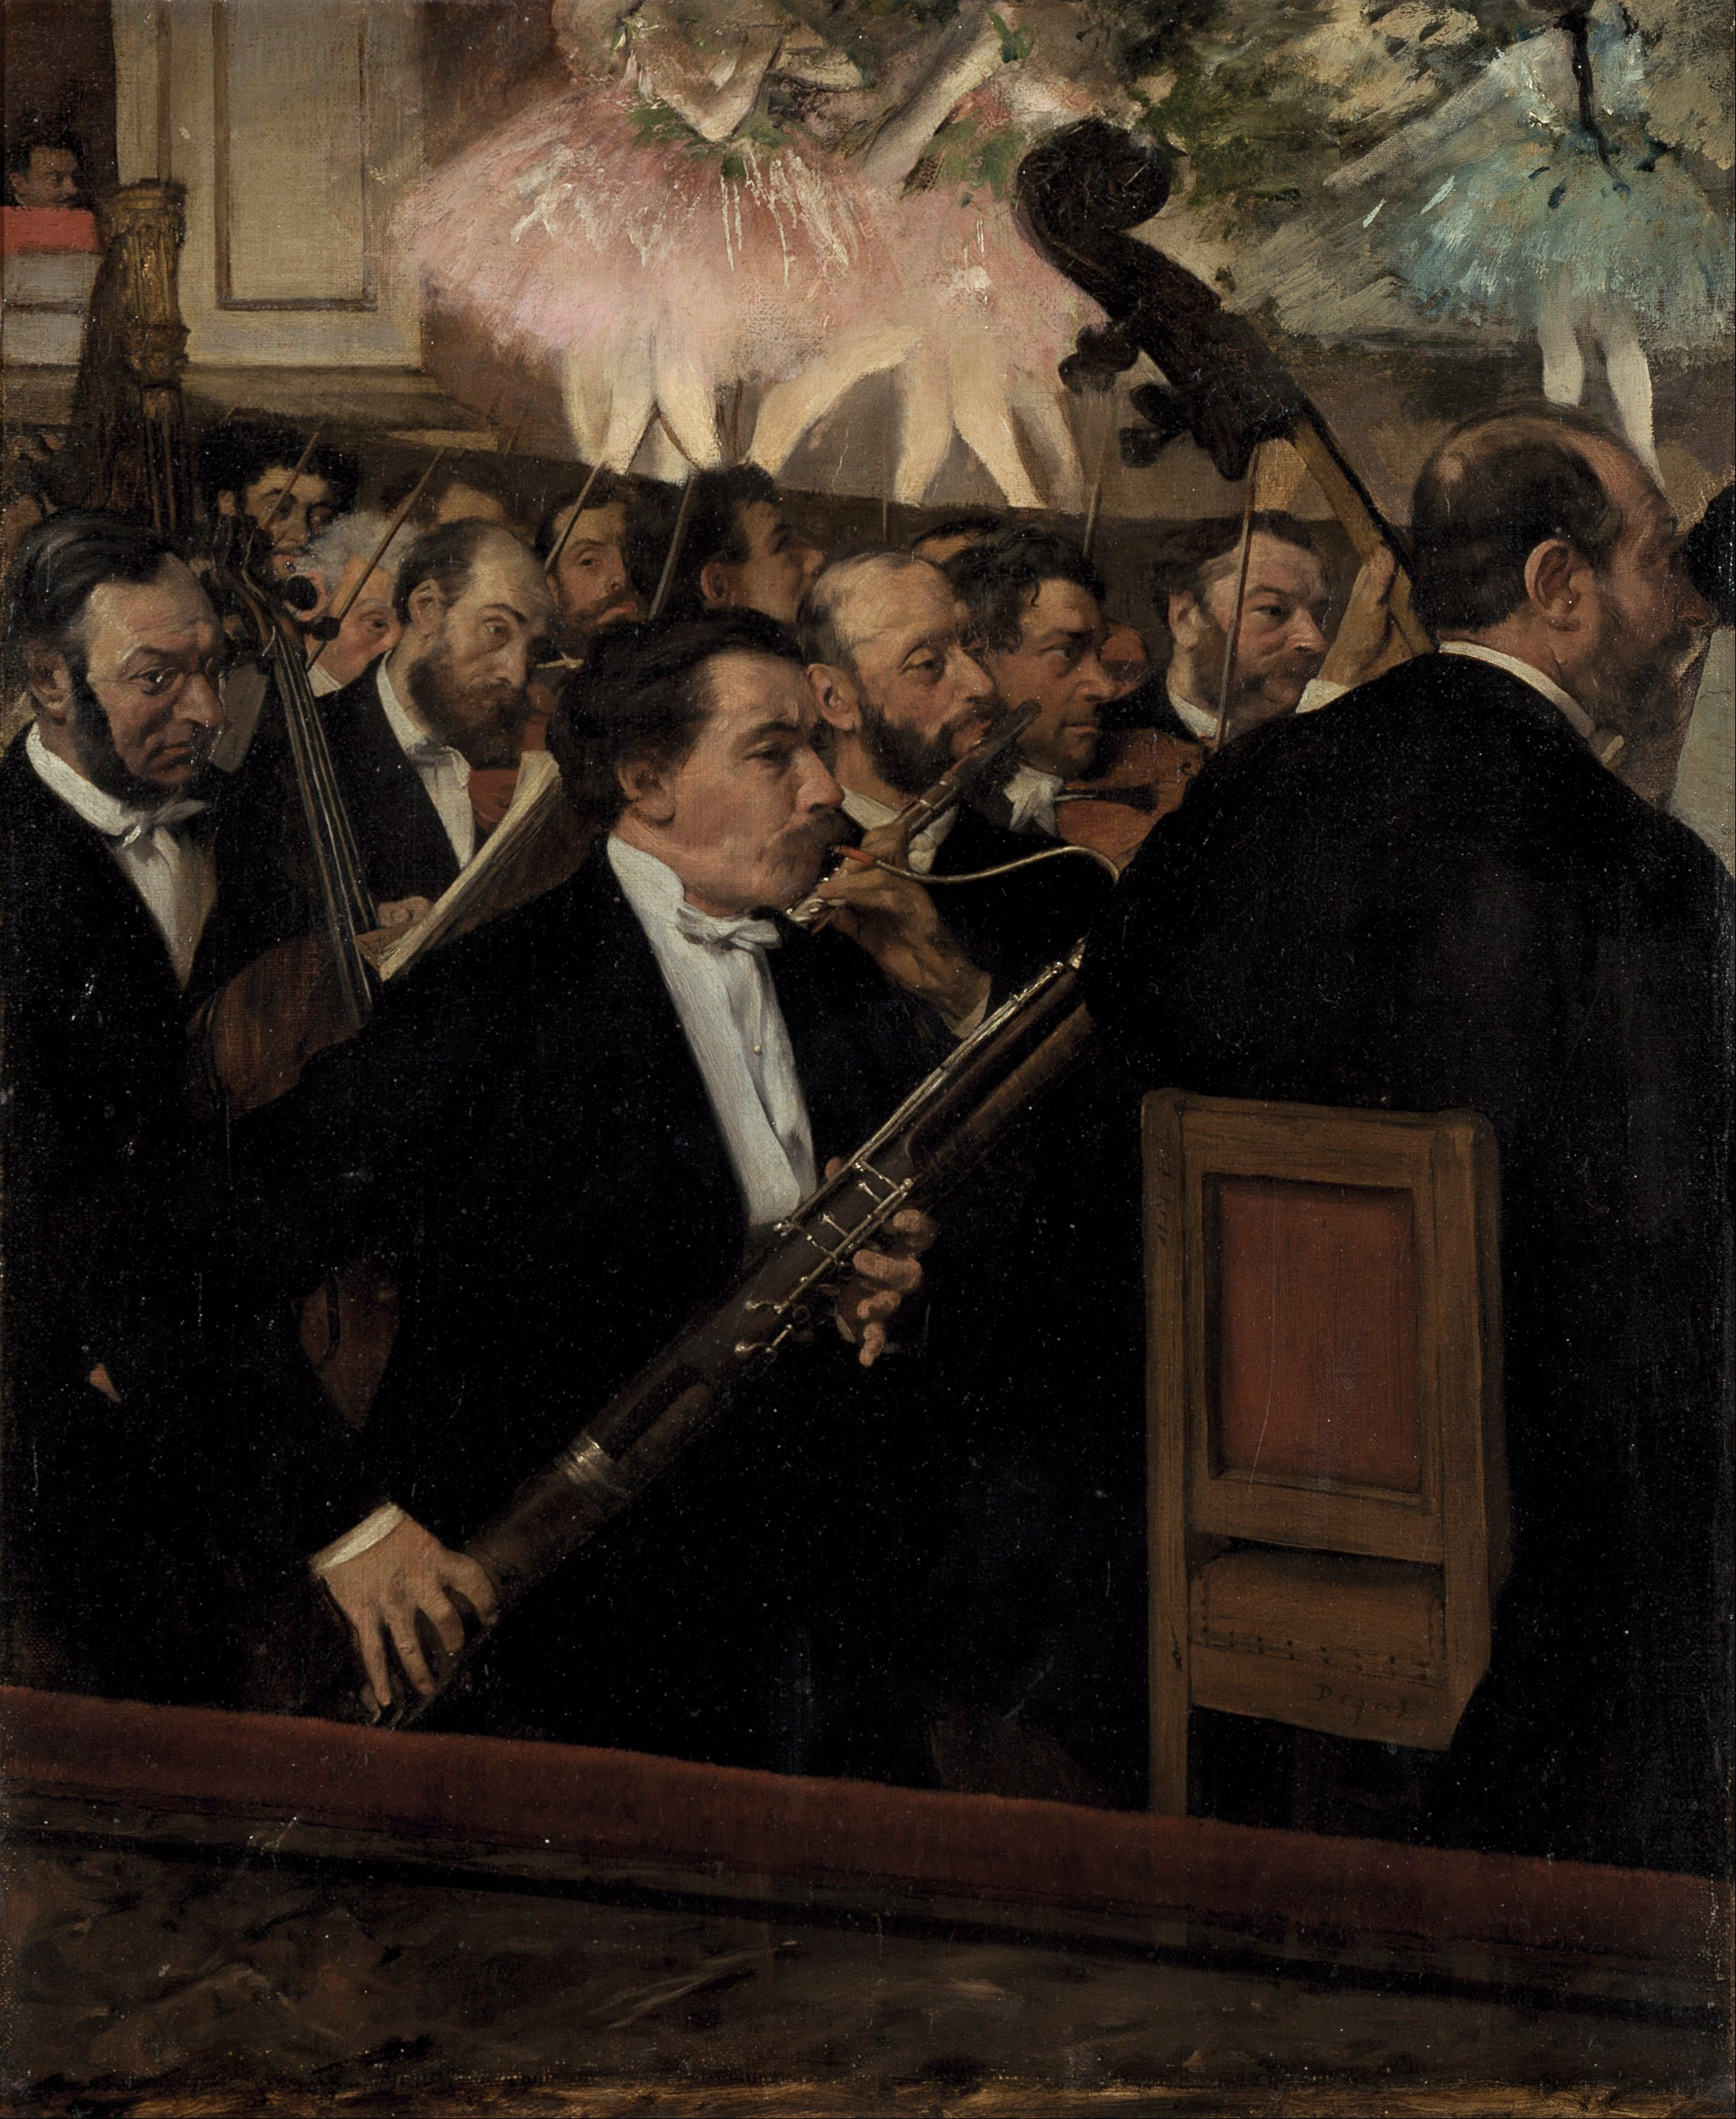 Edgar_Degas_-_The_Orchestra_at_the_Opera (1869)